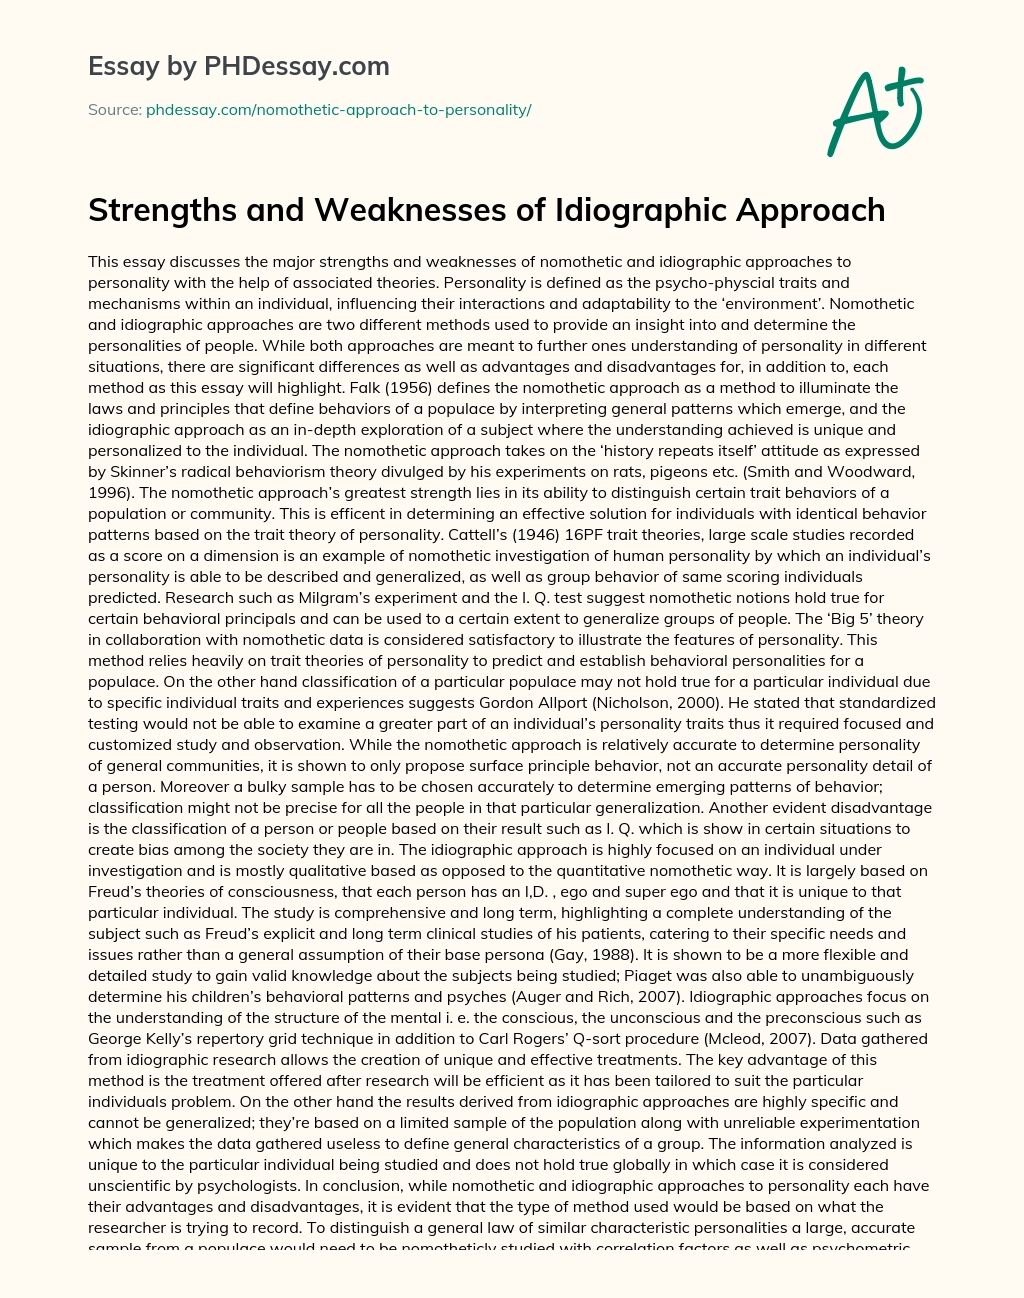 Strengths and Weaknesses of Idiographic Approach essay